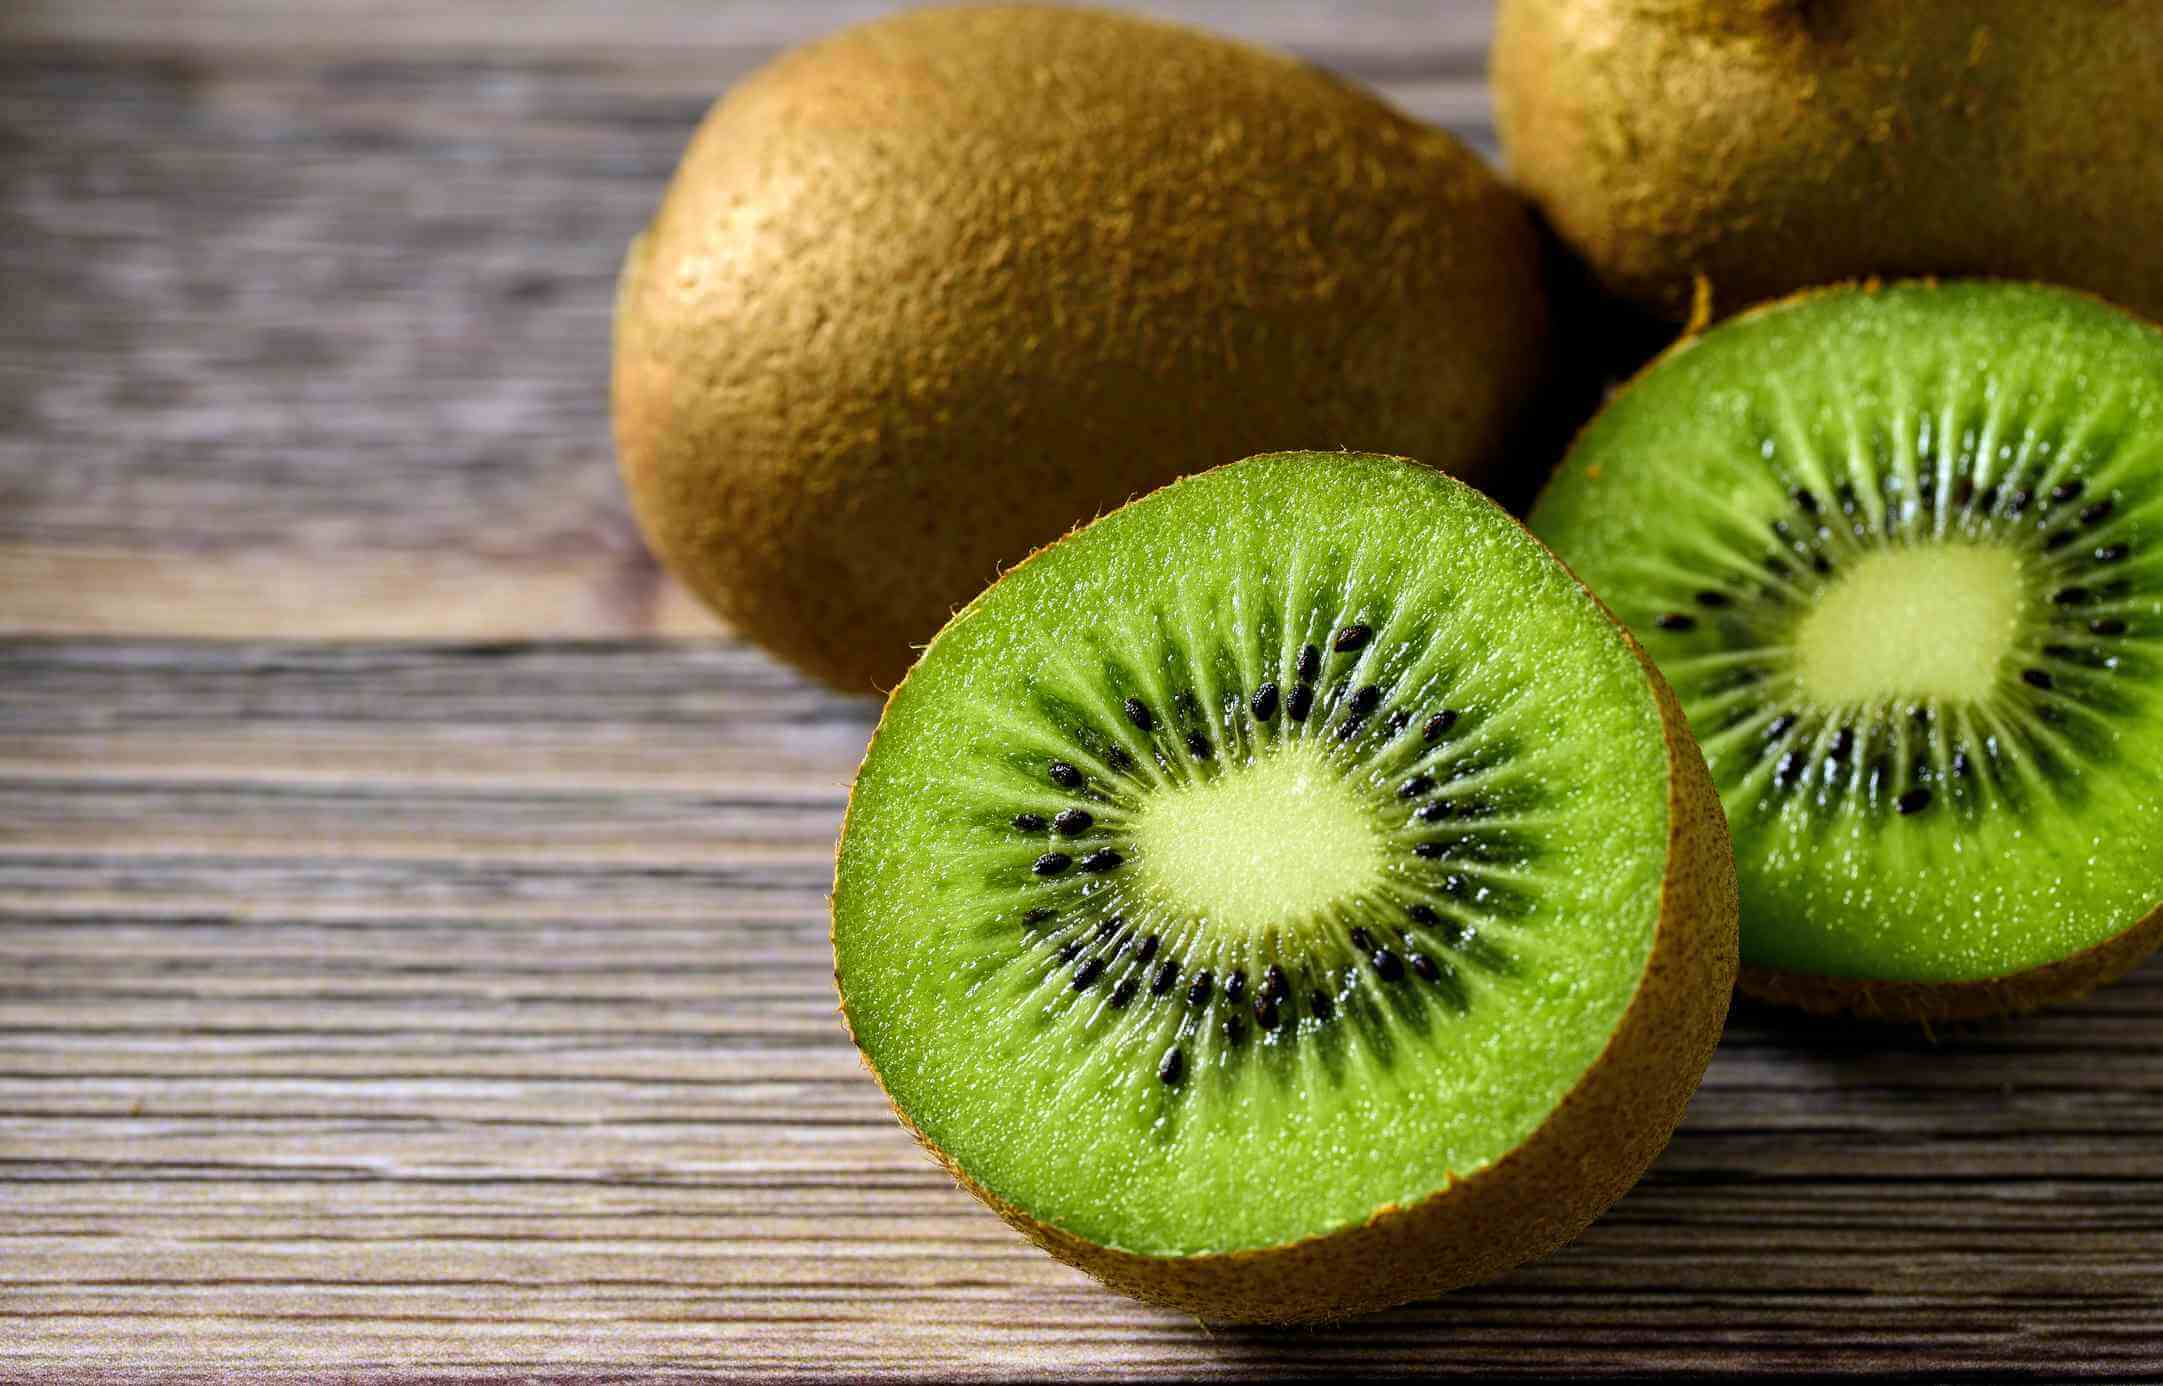 Know when and how to eat kiwi for optimal health benefits